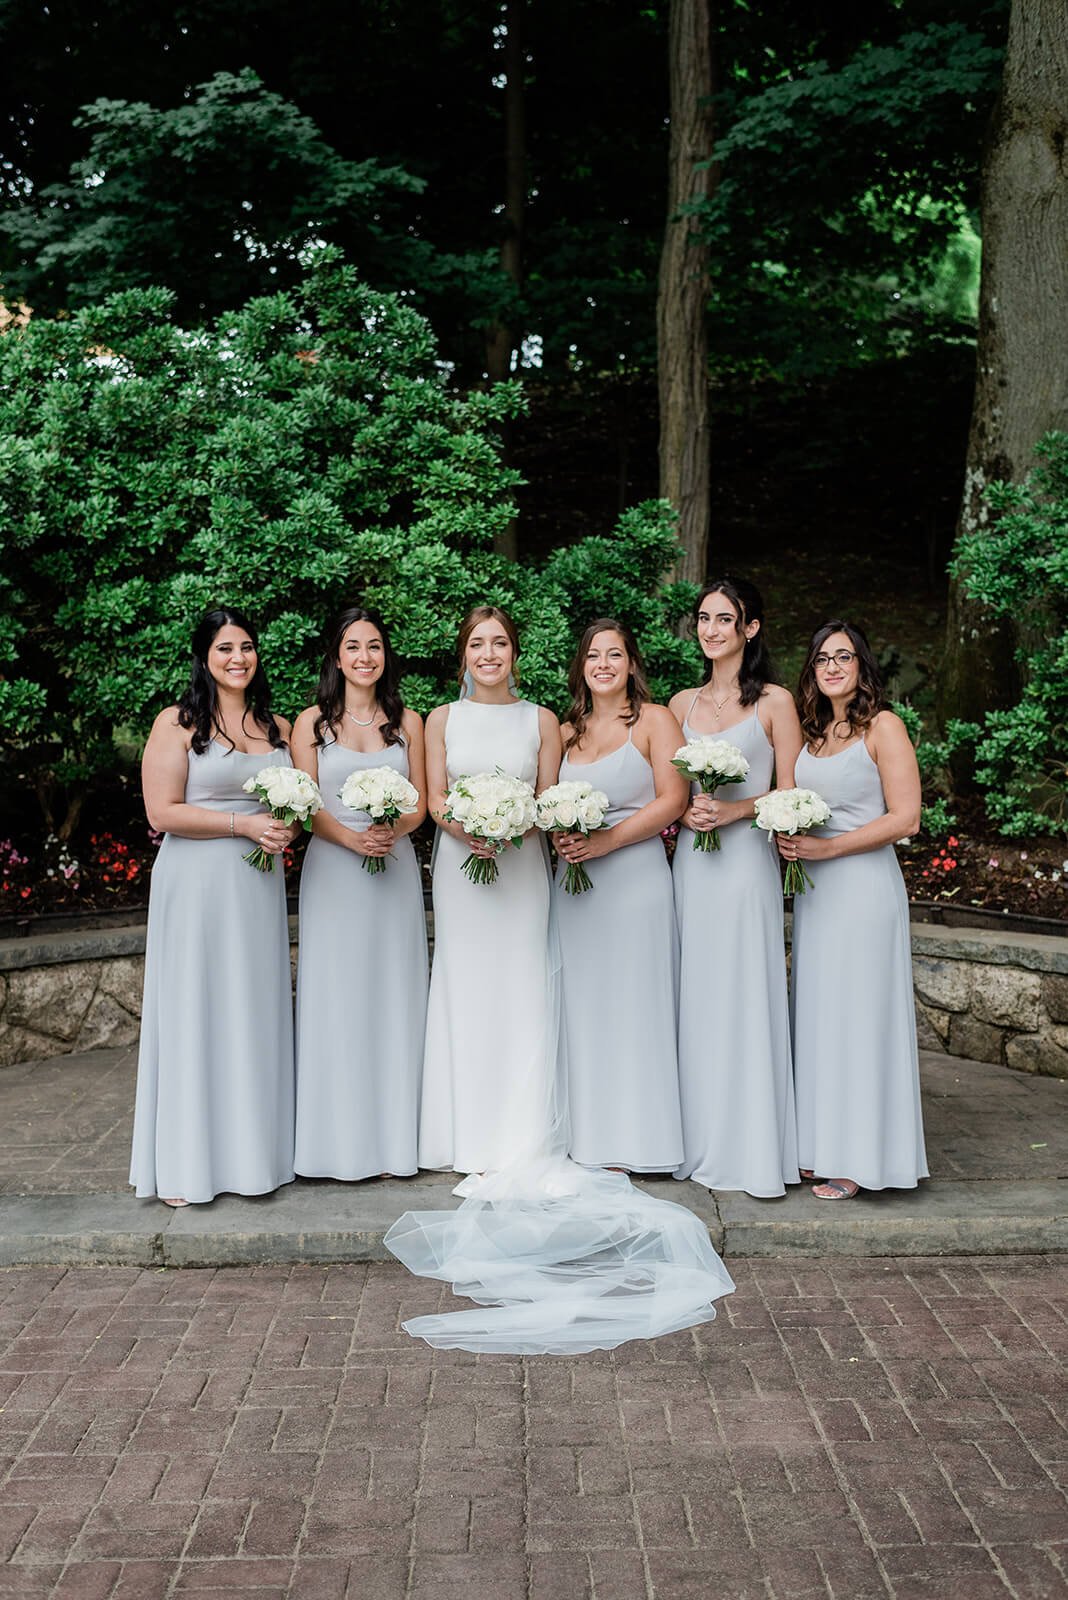 Dusty blue bridesmaids dresses for a wedding in Tarrytown New York